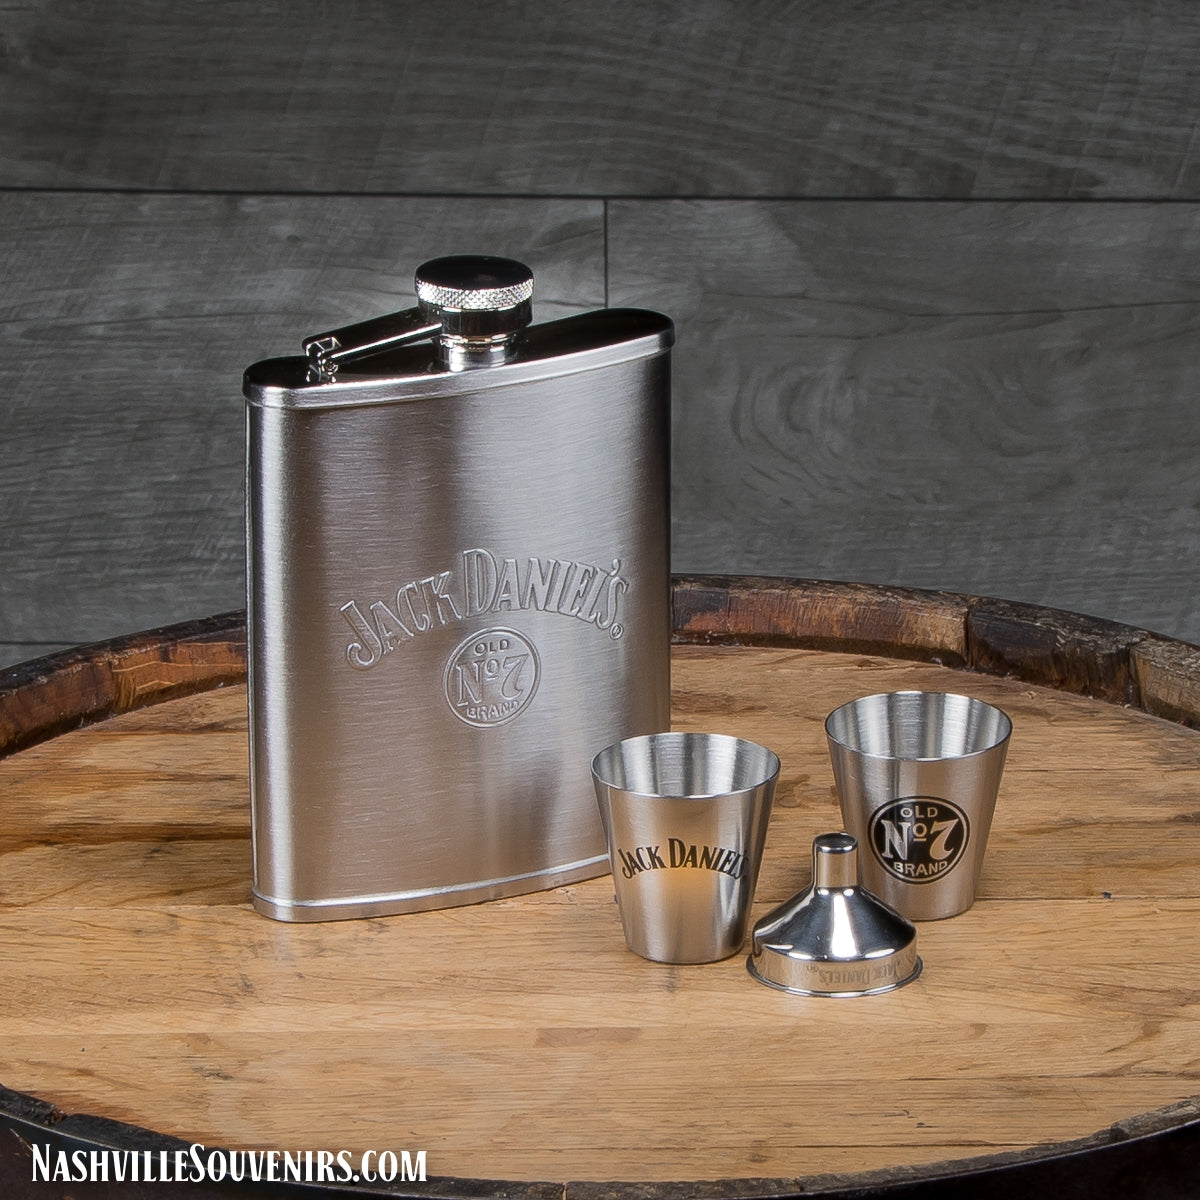 Be prepared! Get an officially licensed Jack Daniels Gift Set with Embossed Flask/Shots/Funnel.  FREE SHIPPING on all US orders over $75! Includes flask, to shot glasses and funnel.